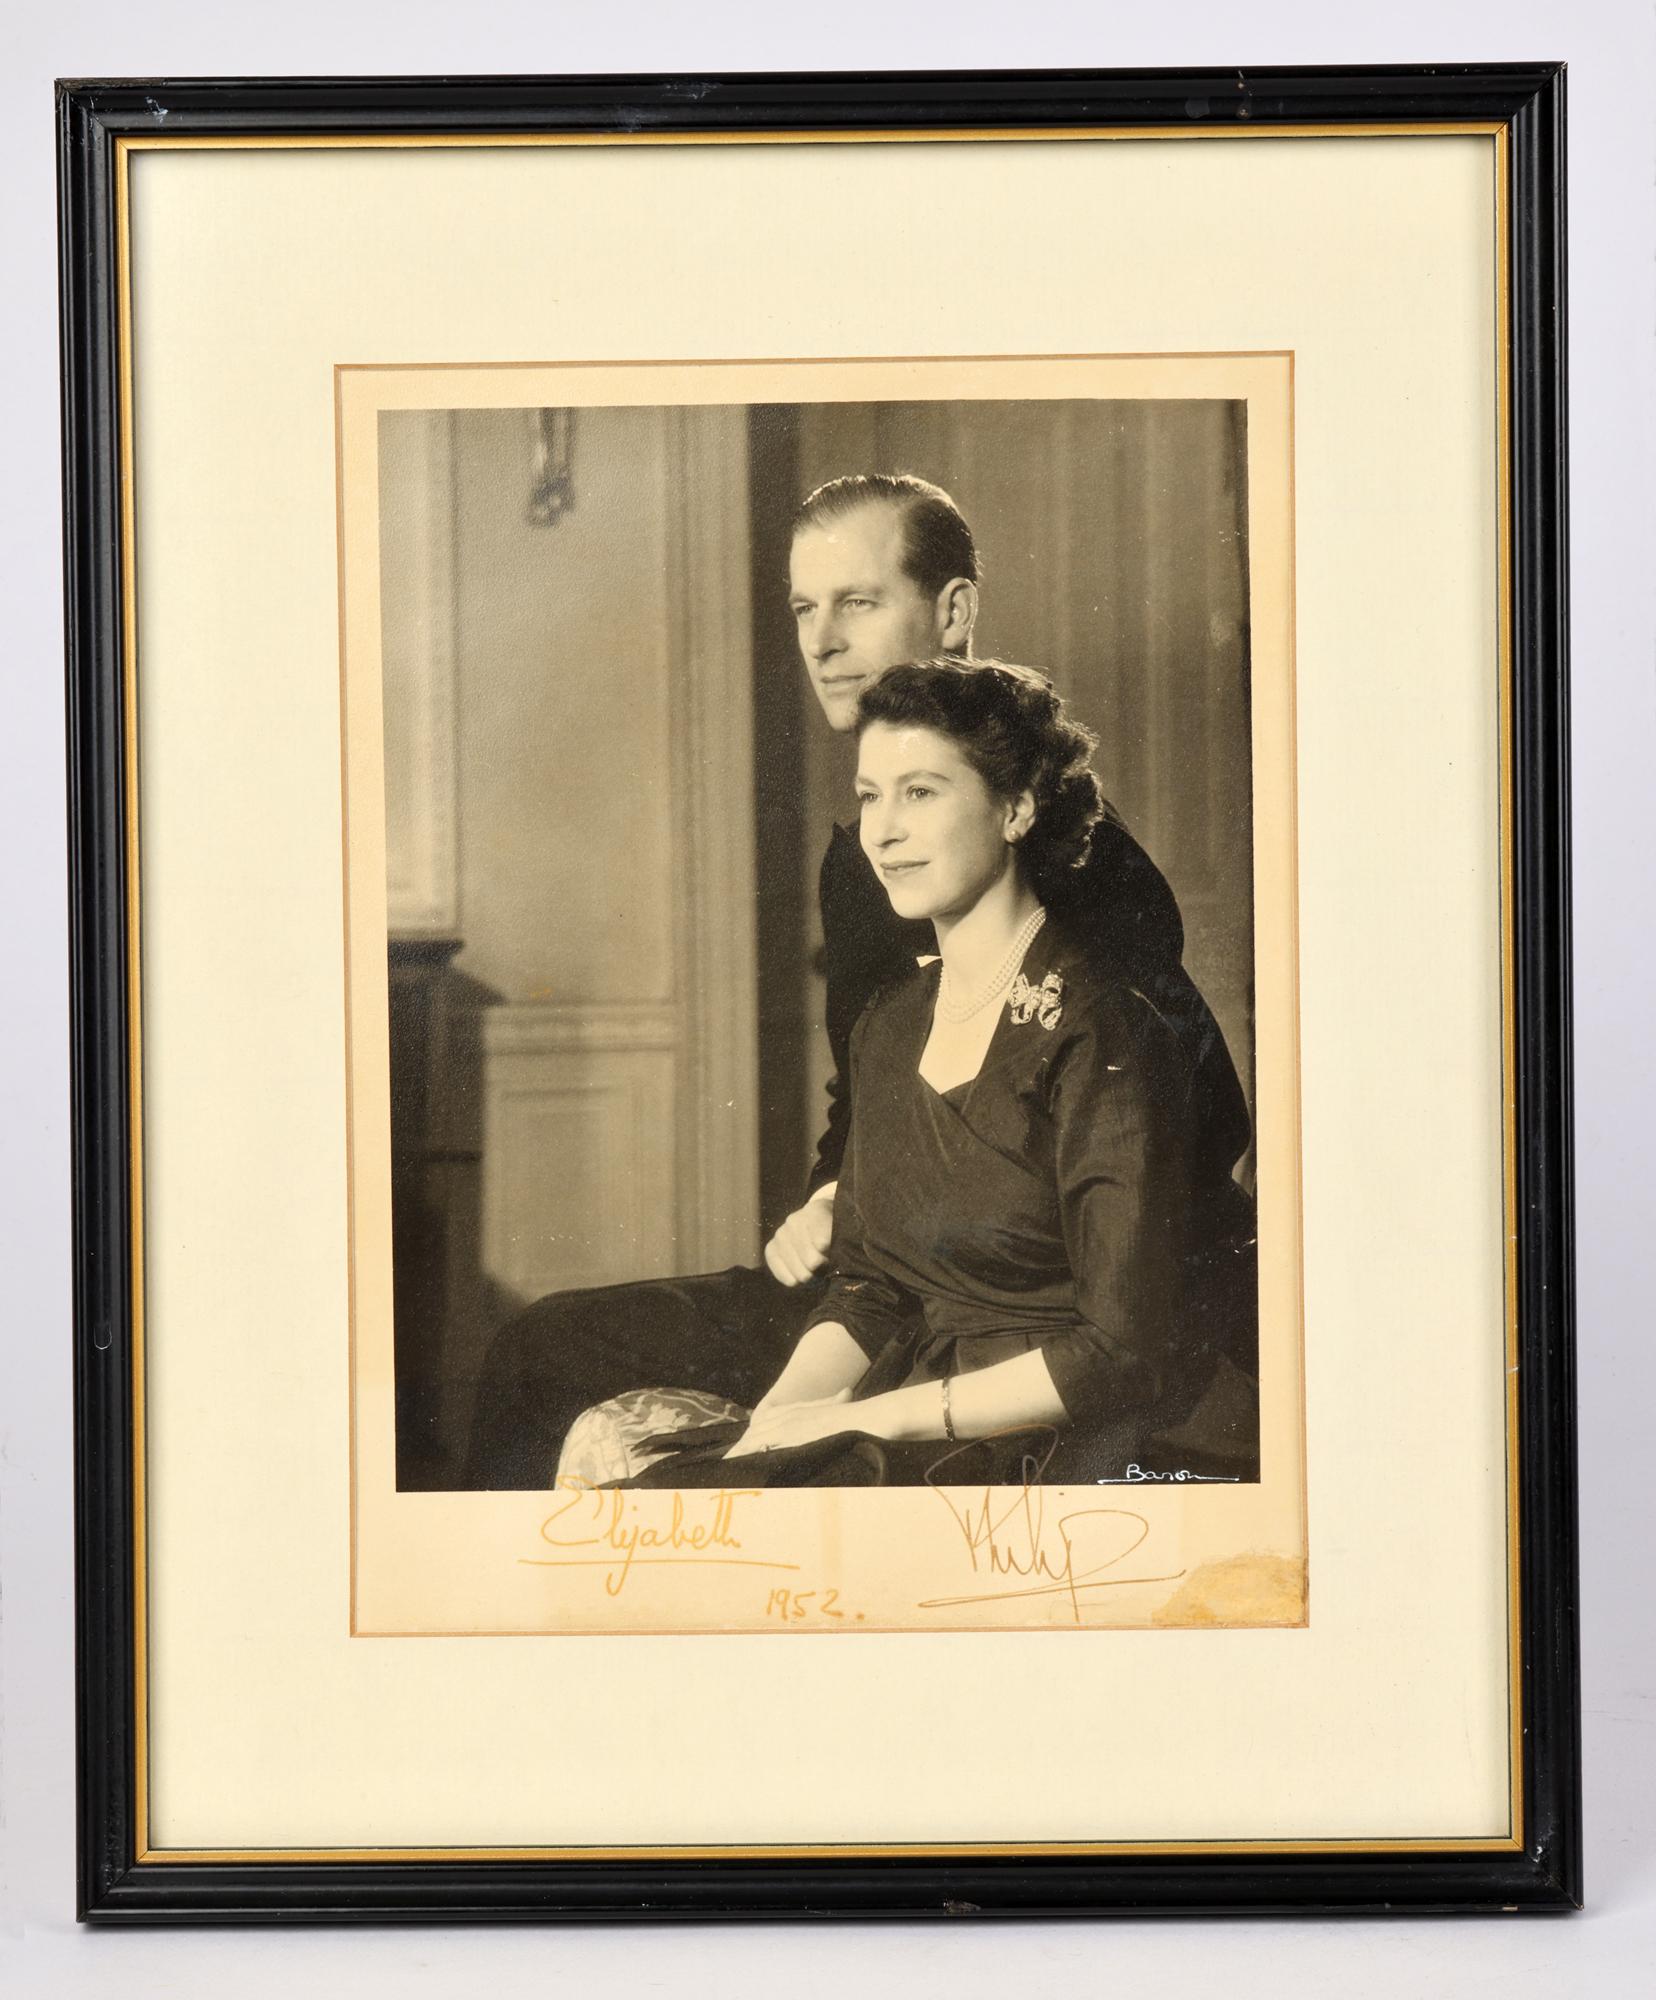 A rare signed framed pre-Coronation black and white photograph of Princess Elizabeth together with Prince Philip by Sterling Henry Nahum (signed Baron) (1906-1956) dated 1952. The finely composed silver albumen portrait portrays Princess Elizabeth